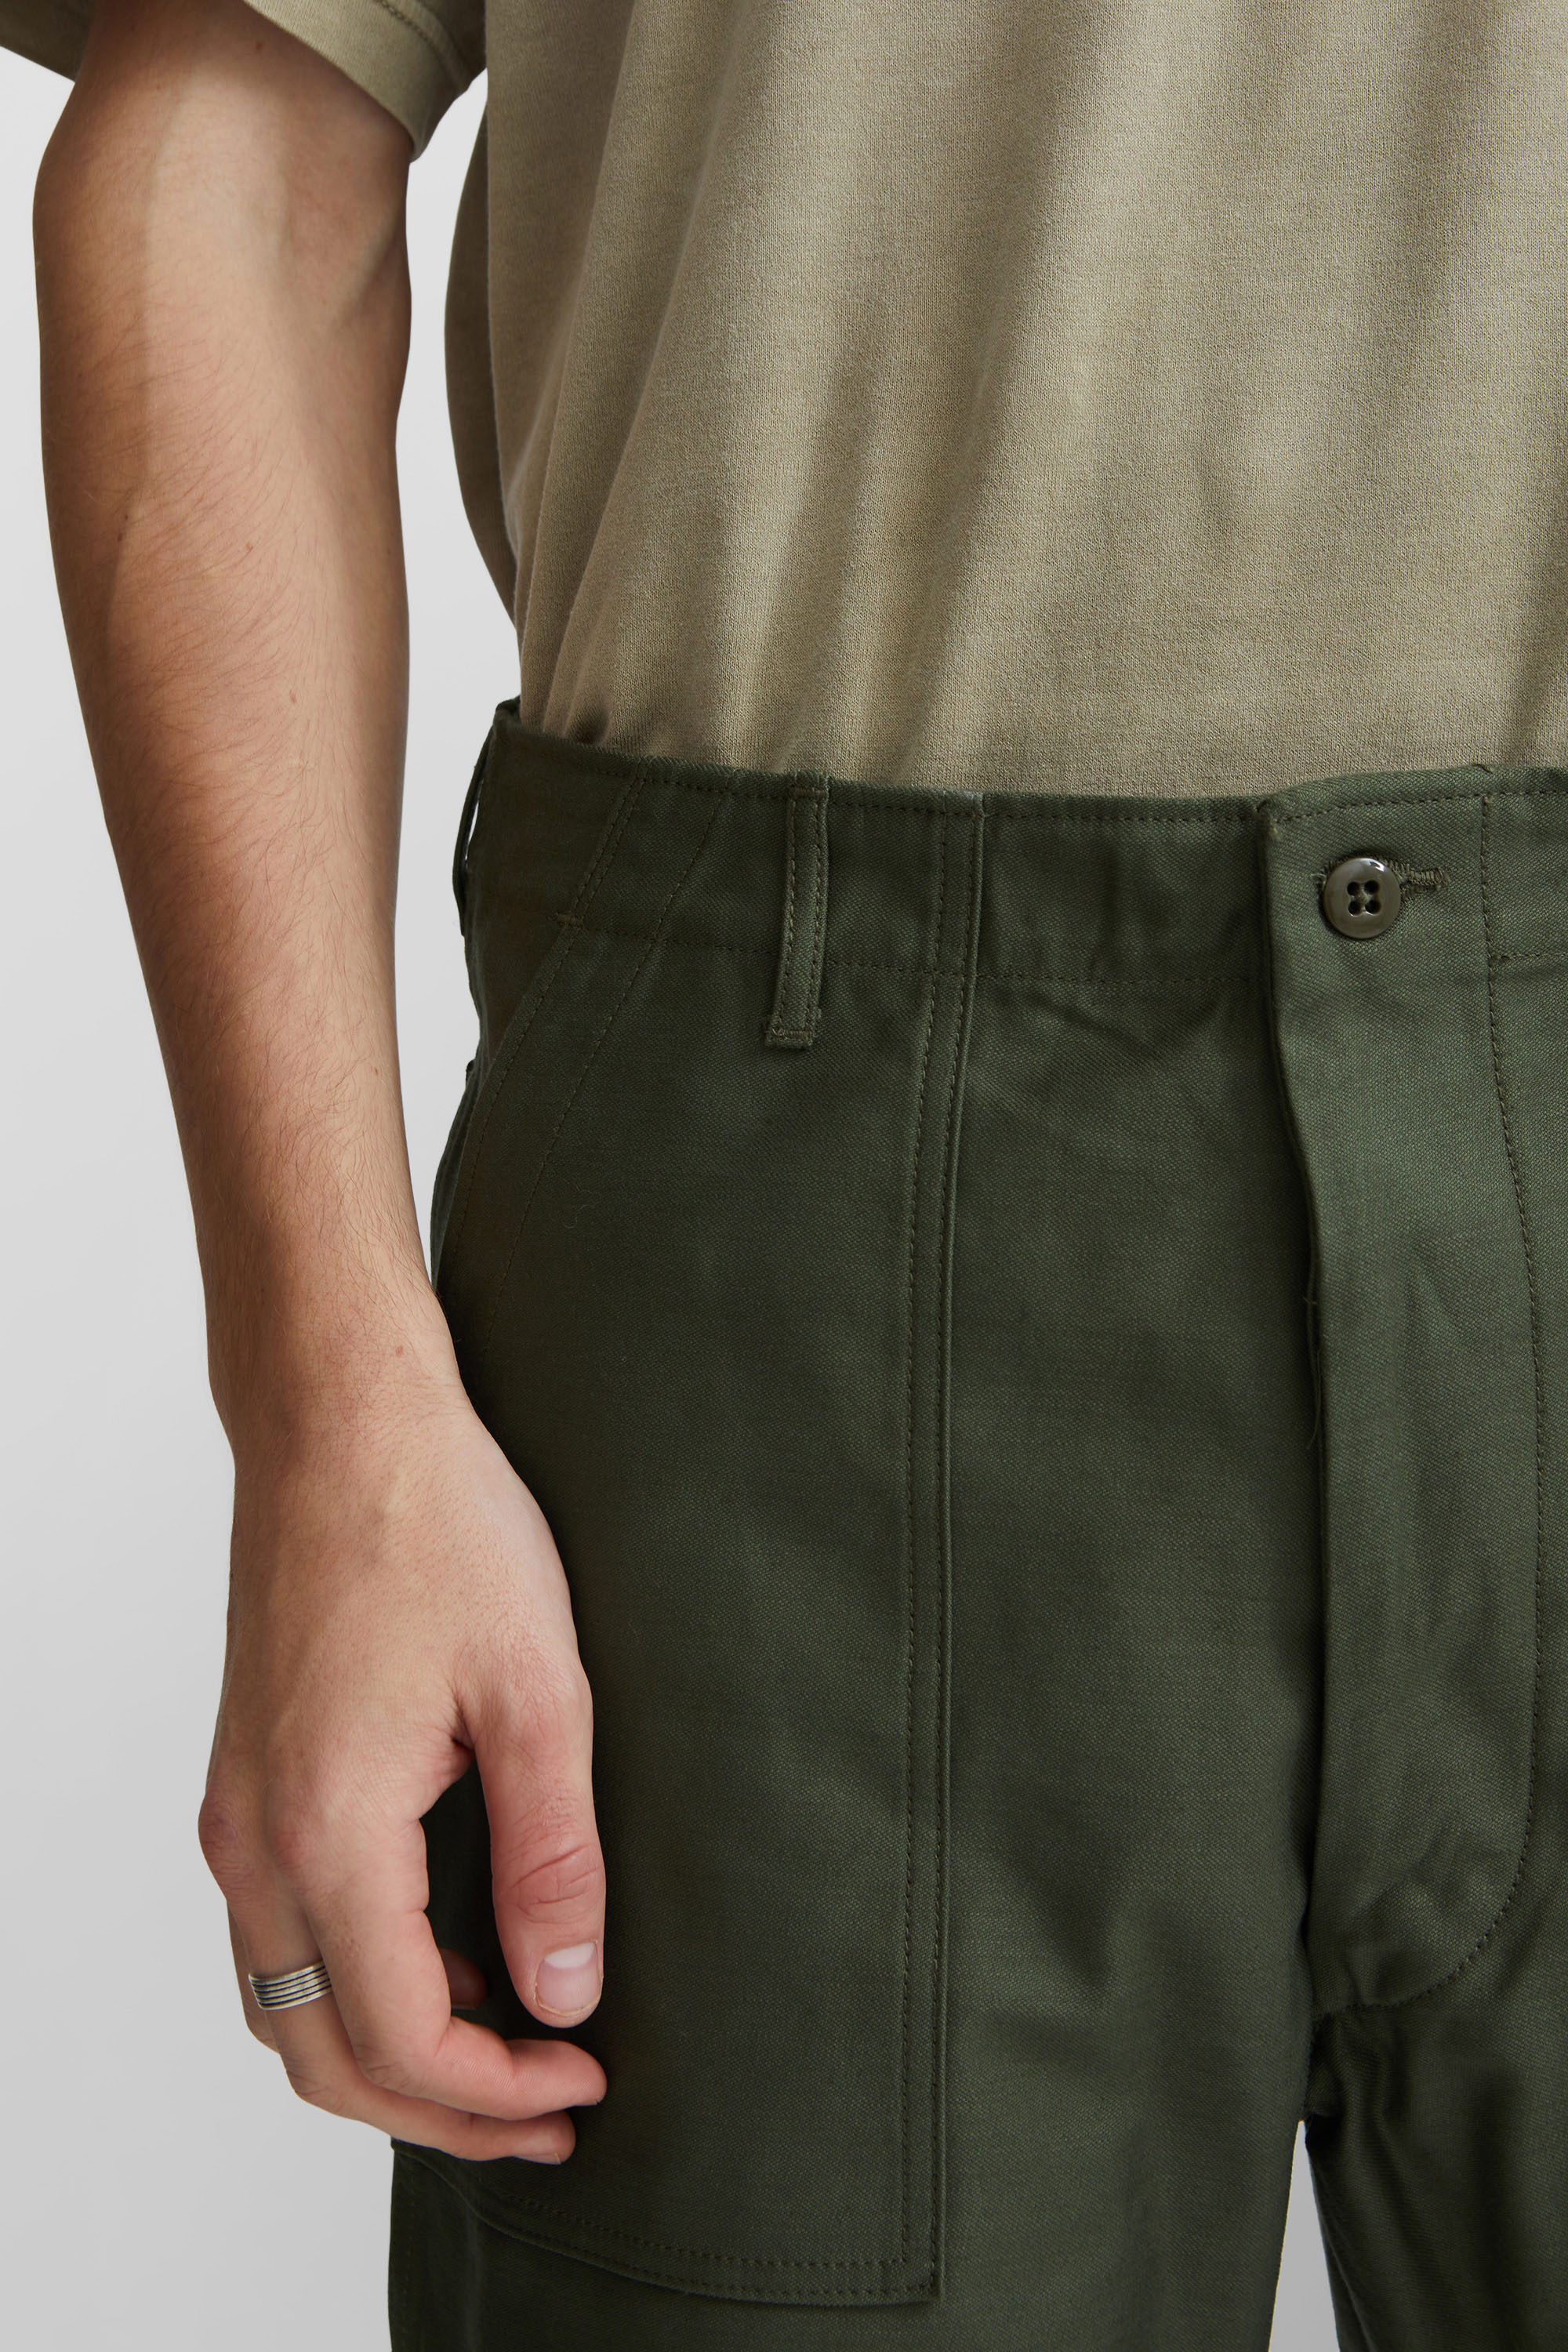 WTAPS WMILL-Trousers 02 / Cotton. Olive drab | WoodWood.com